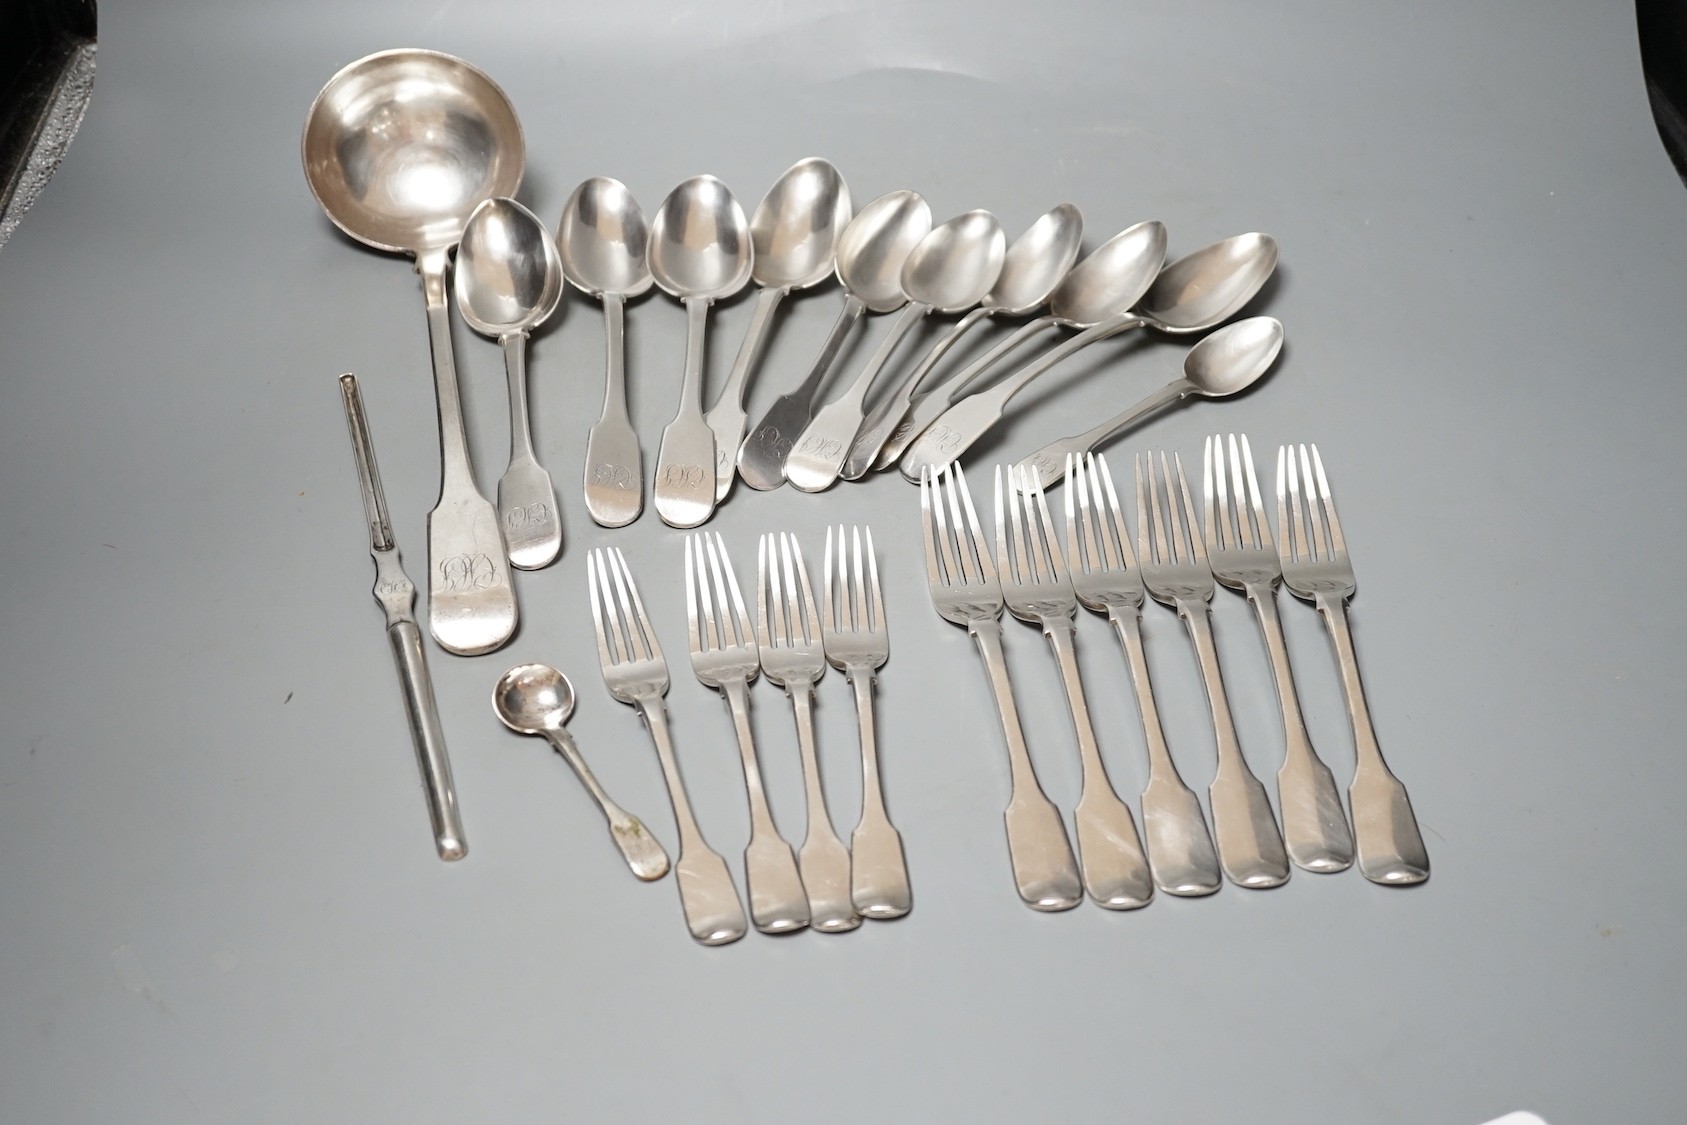 Twenty three items of continental white metal fiddle pattern flatware, stamped GH, including a soup ladle and marrow scoop